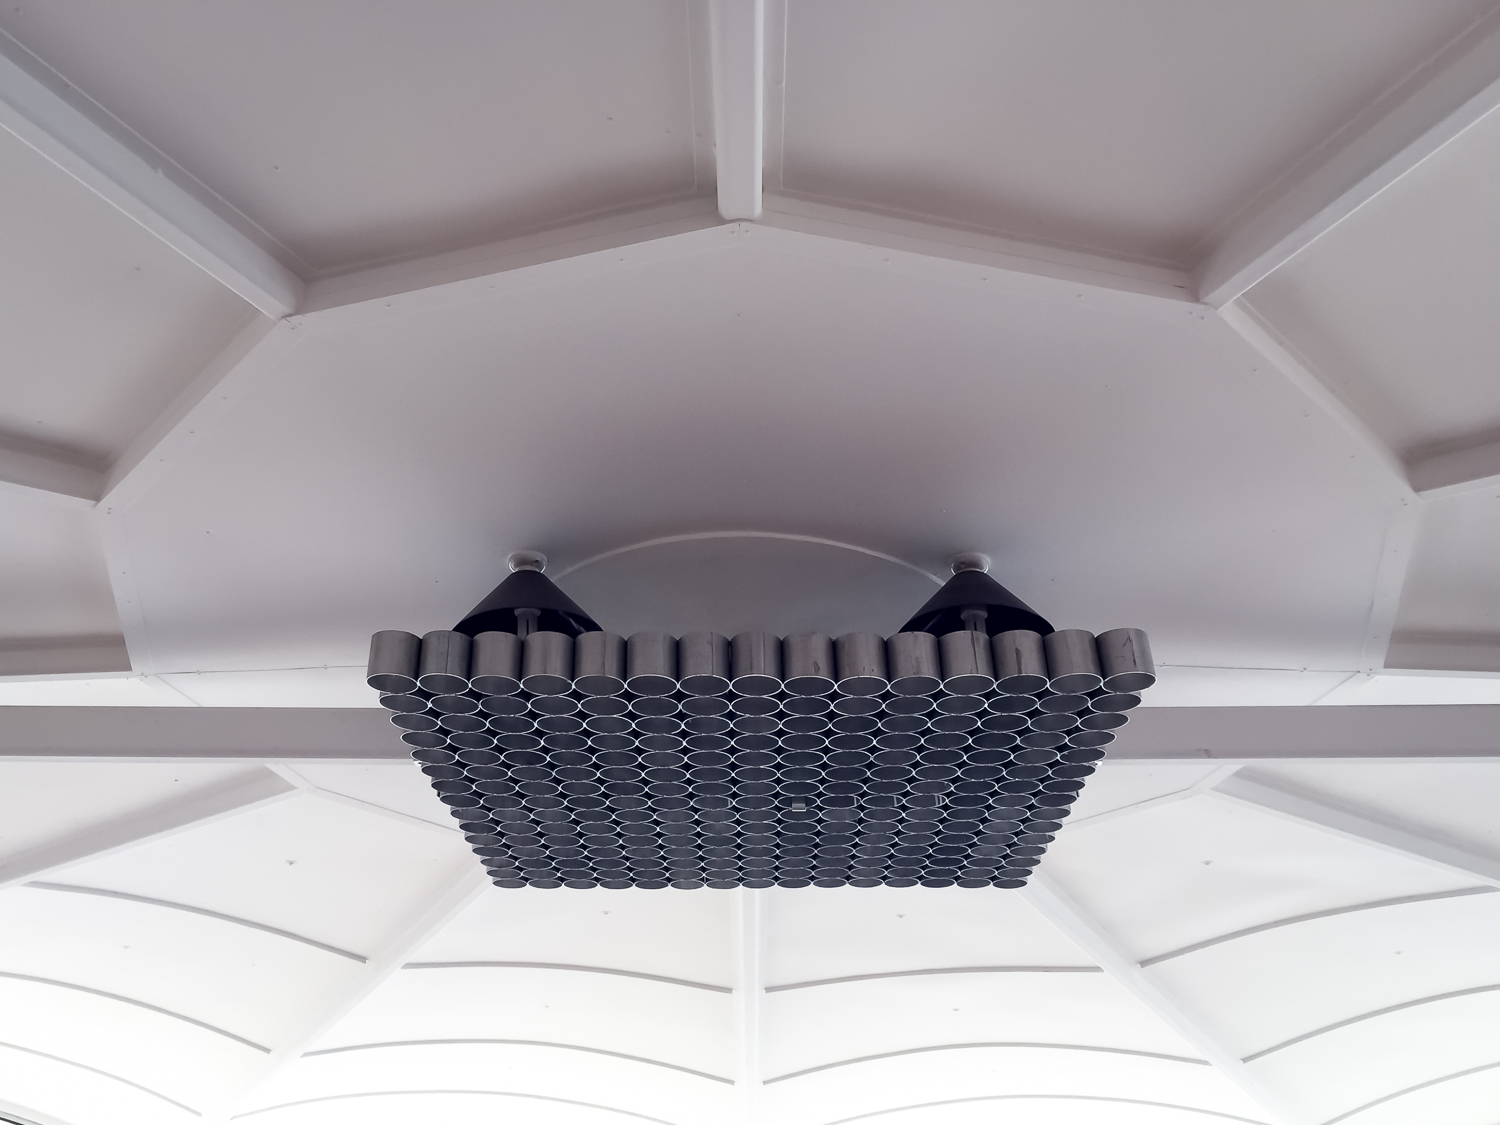 A ceiling with radial lines and a large bank of tubular black lights